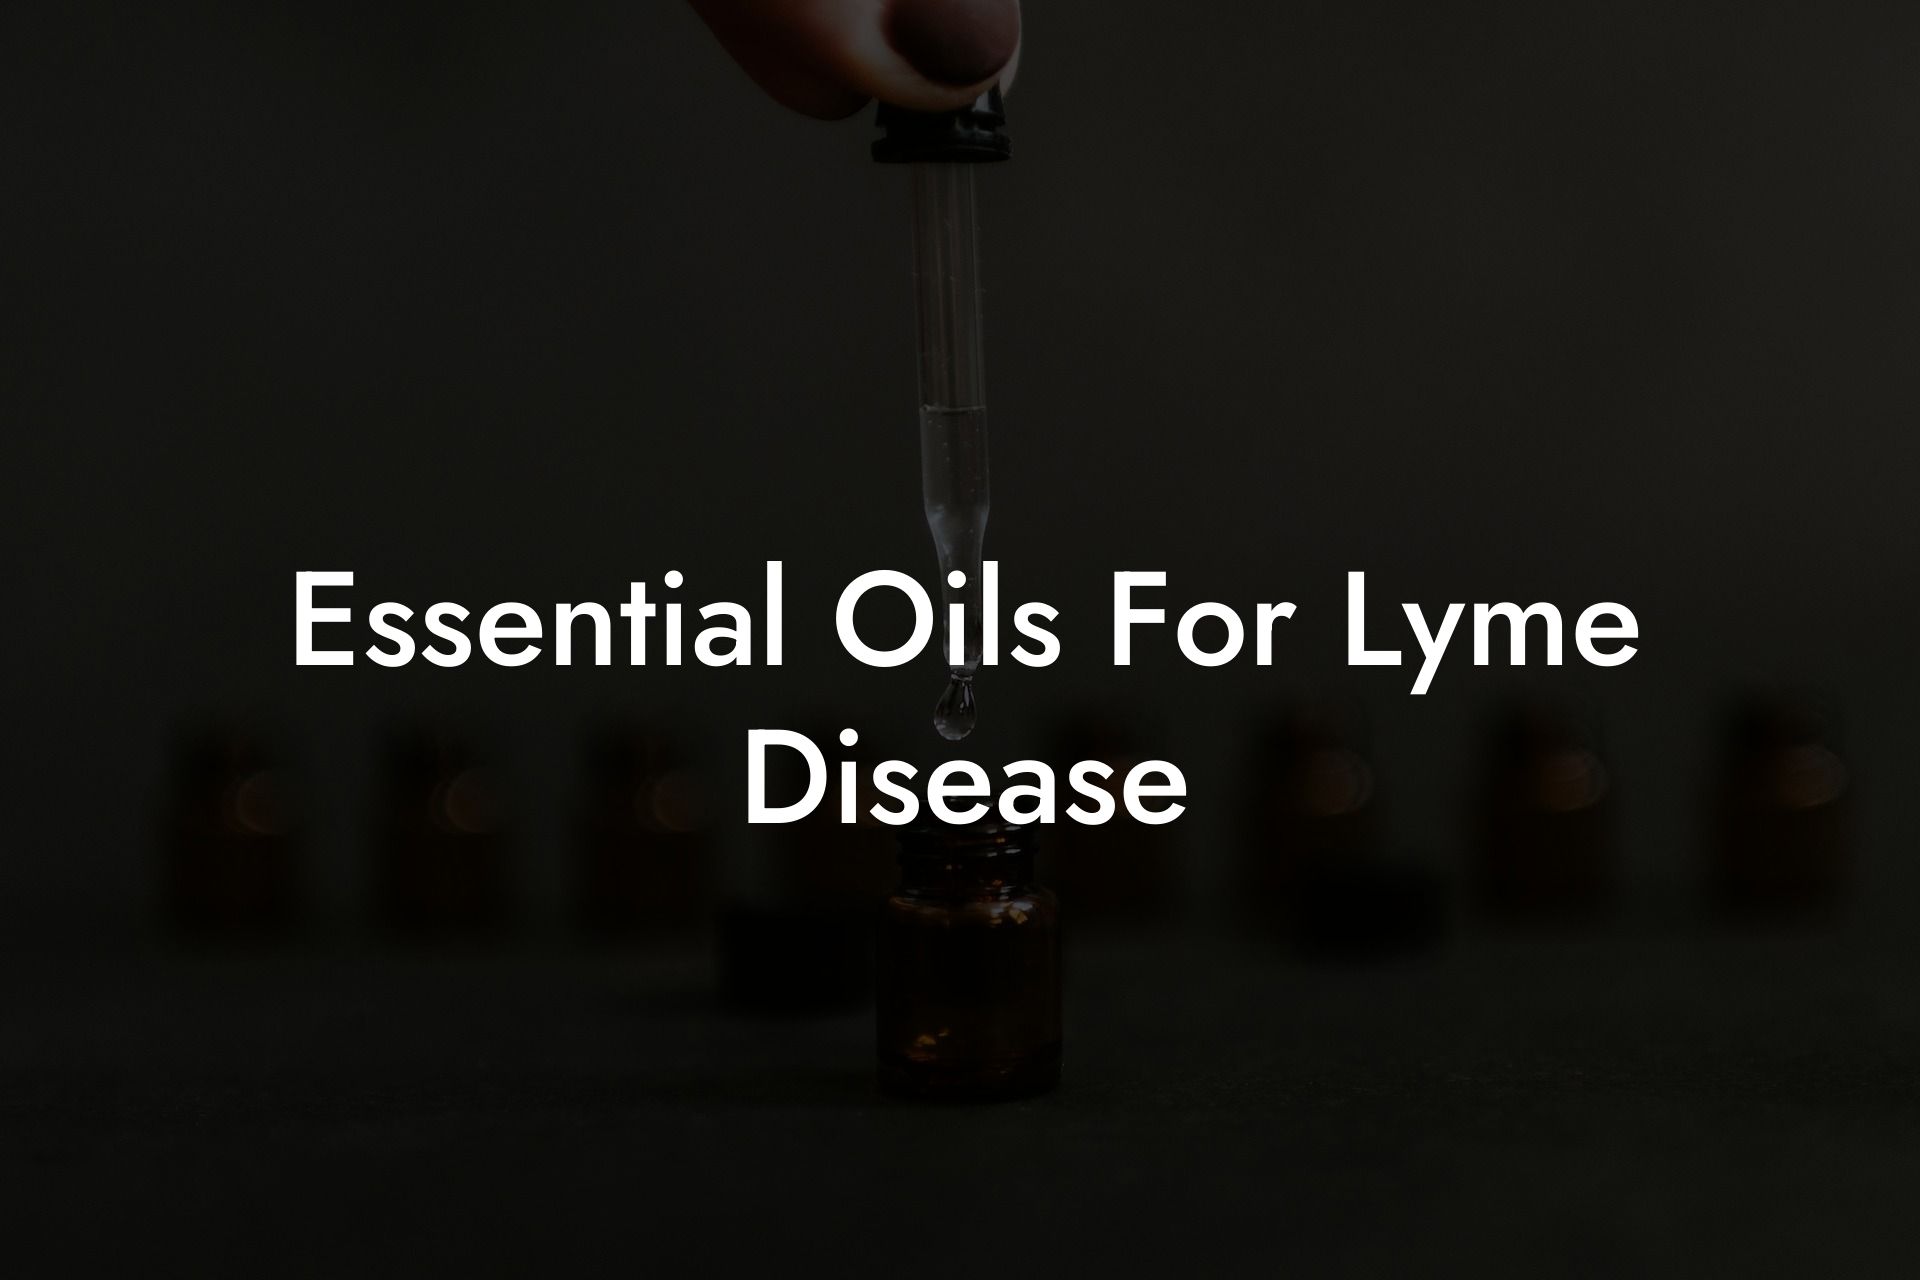 Essential Oils For Lyme Disease